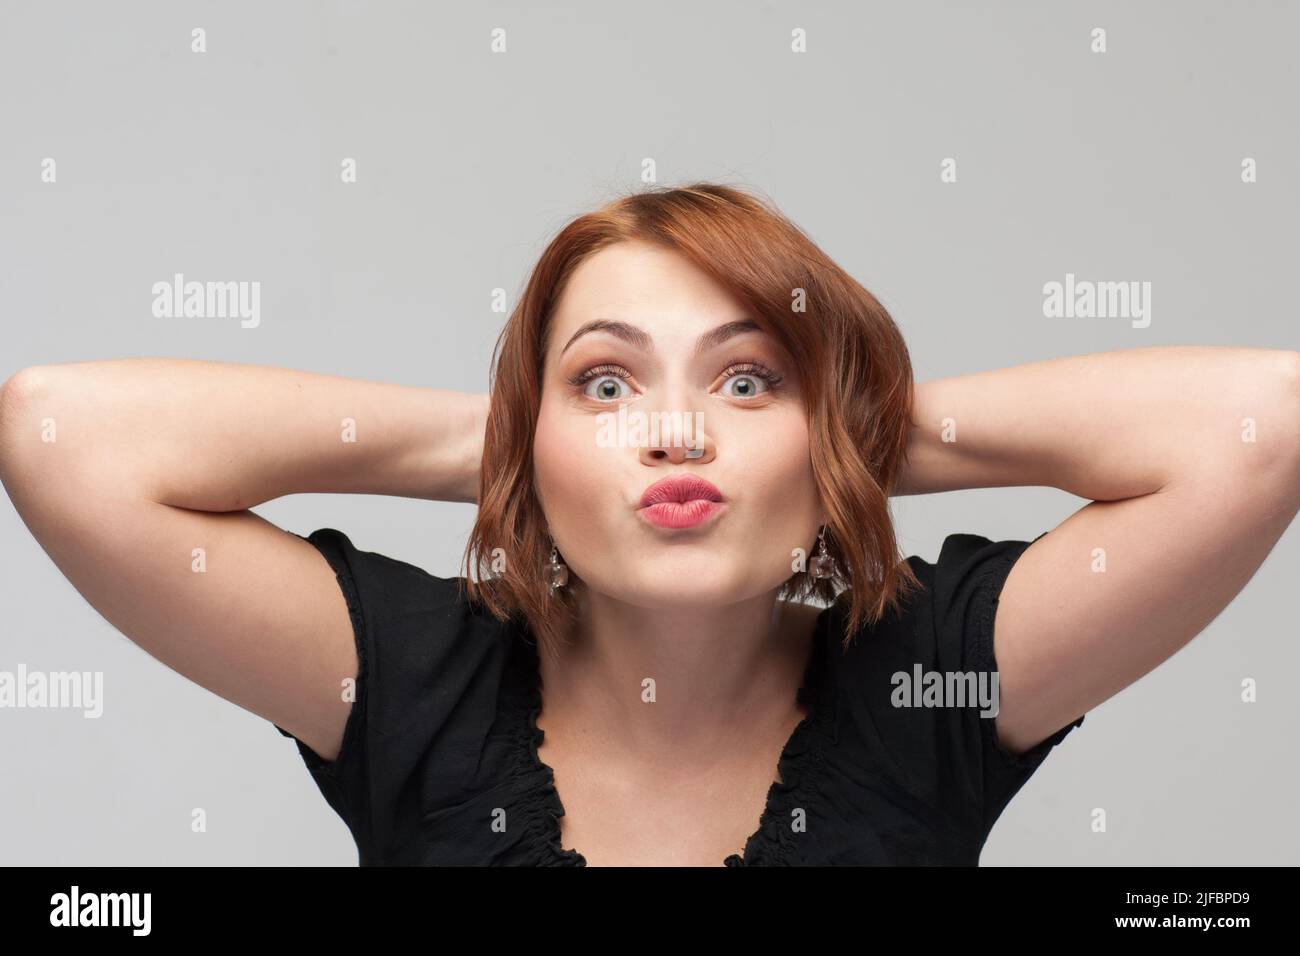 Playful female mood. Forever young Stock Photo